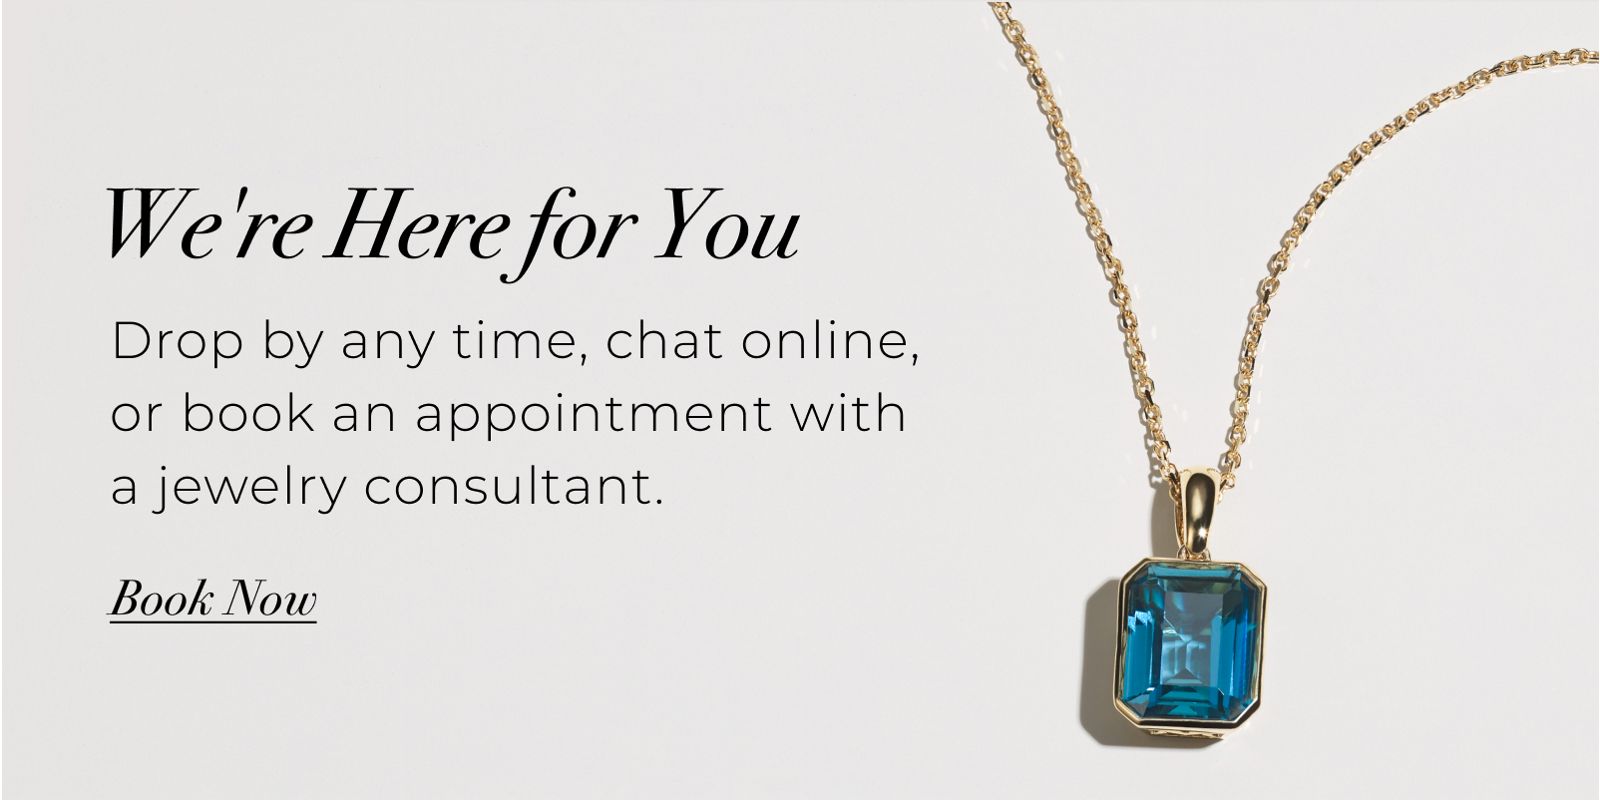 Were Here for You - Drop by any time, chat online, or book an appointment with a jewelry consultant. Book Now >